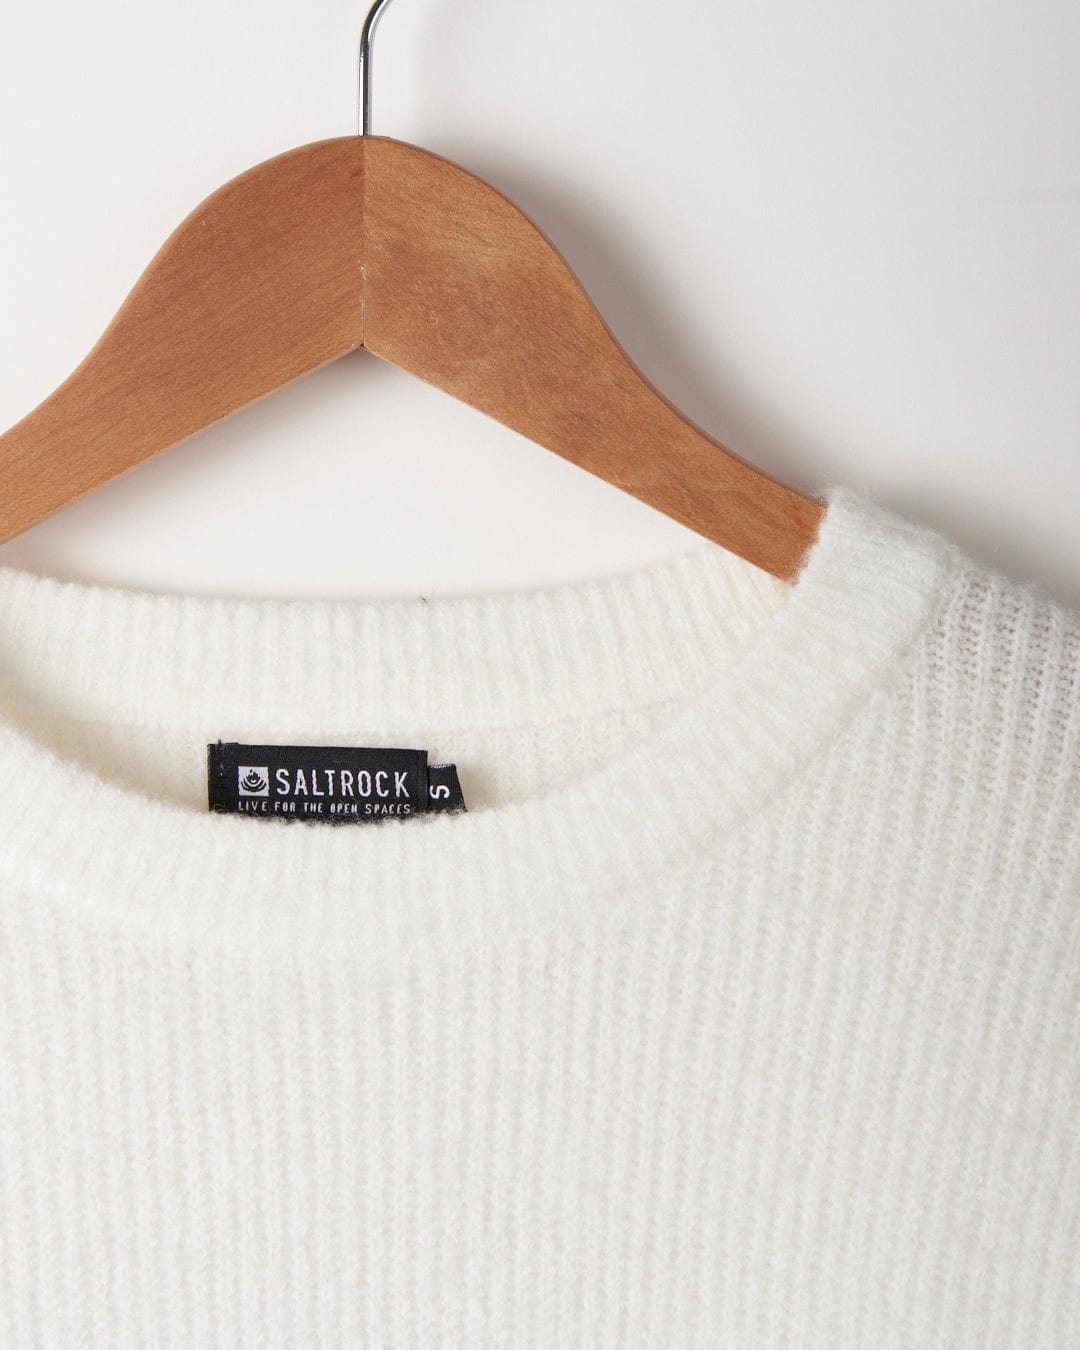 A Darcy - Womens Knitwear - White sweater hangs on a wooden hanger, showcasing its soft touch. (Saltrock)